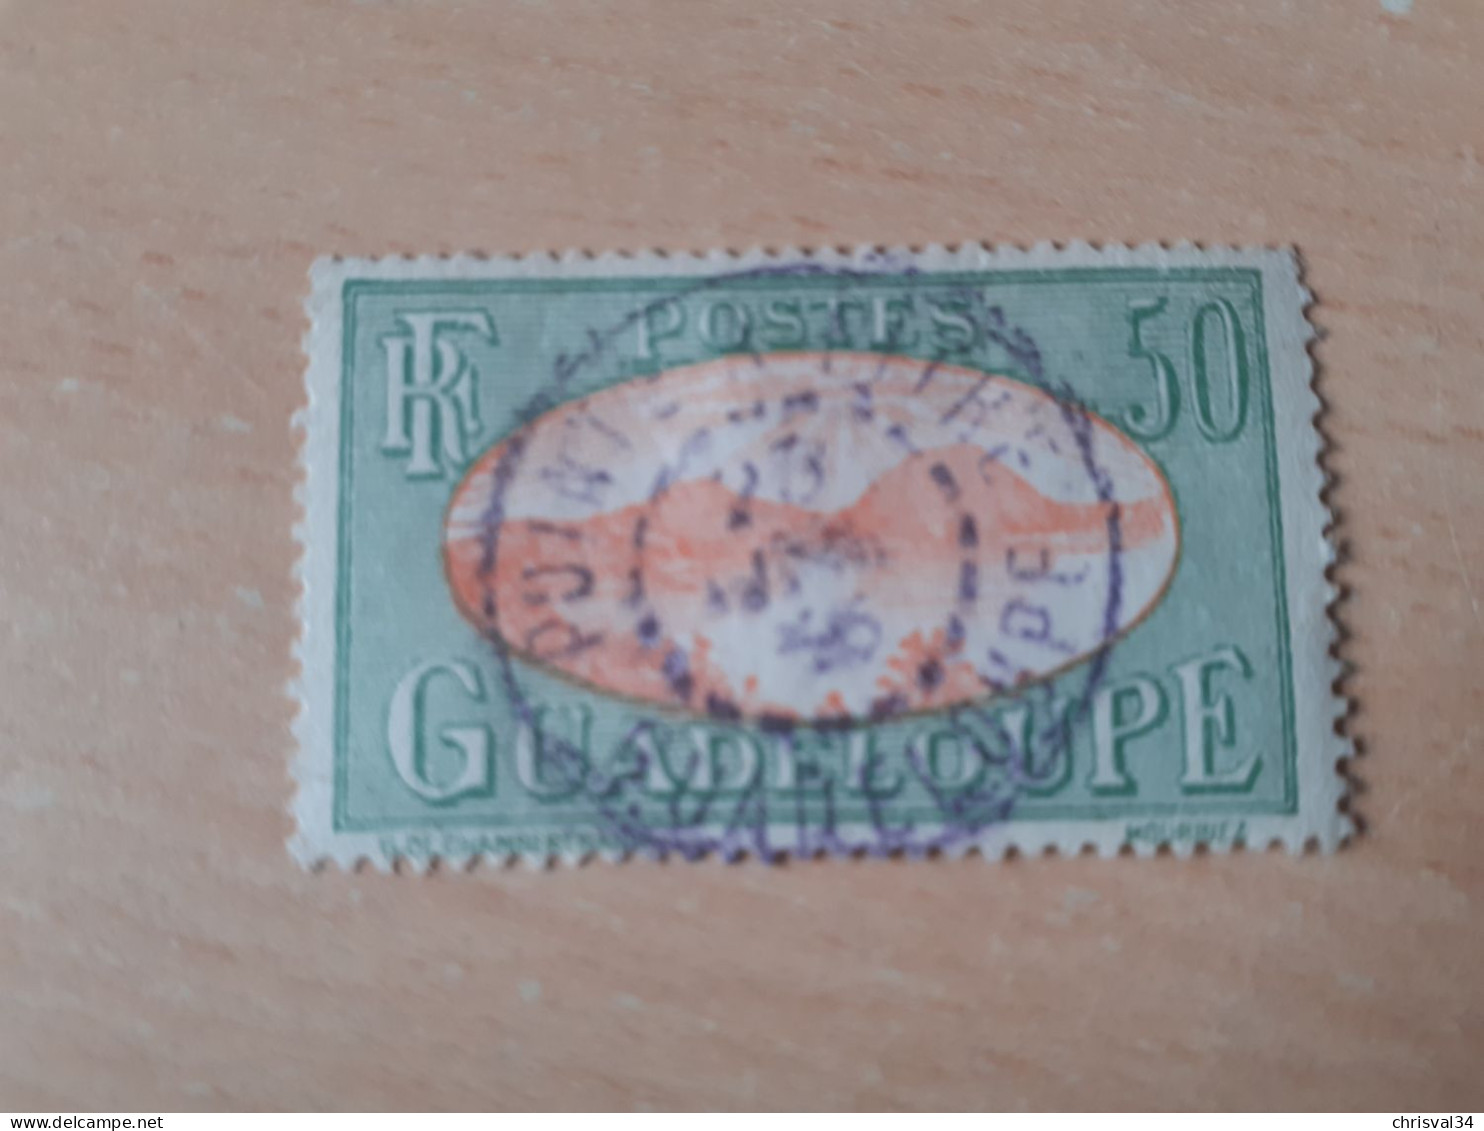 TIMBRE   GUADELOUPE       N  110     COTE  0,50   EUROS  OBLITERE - Gebraucht